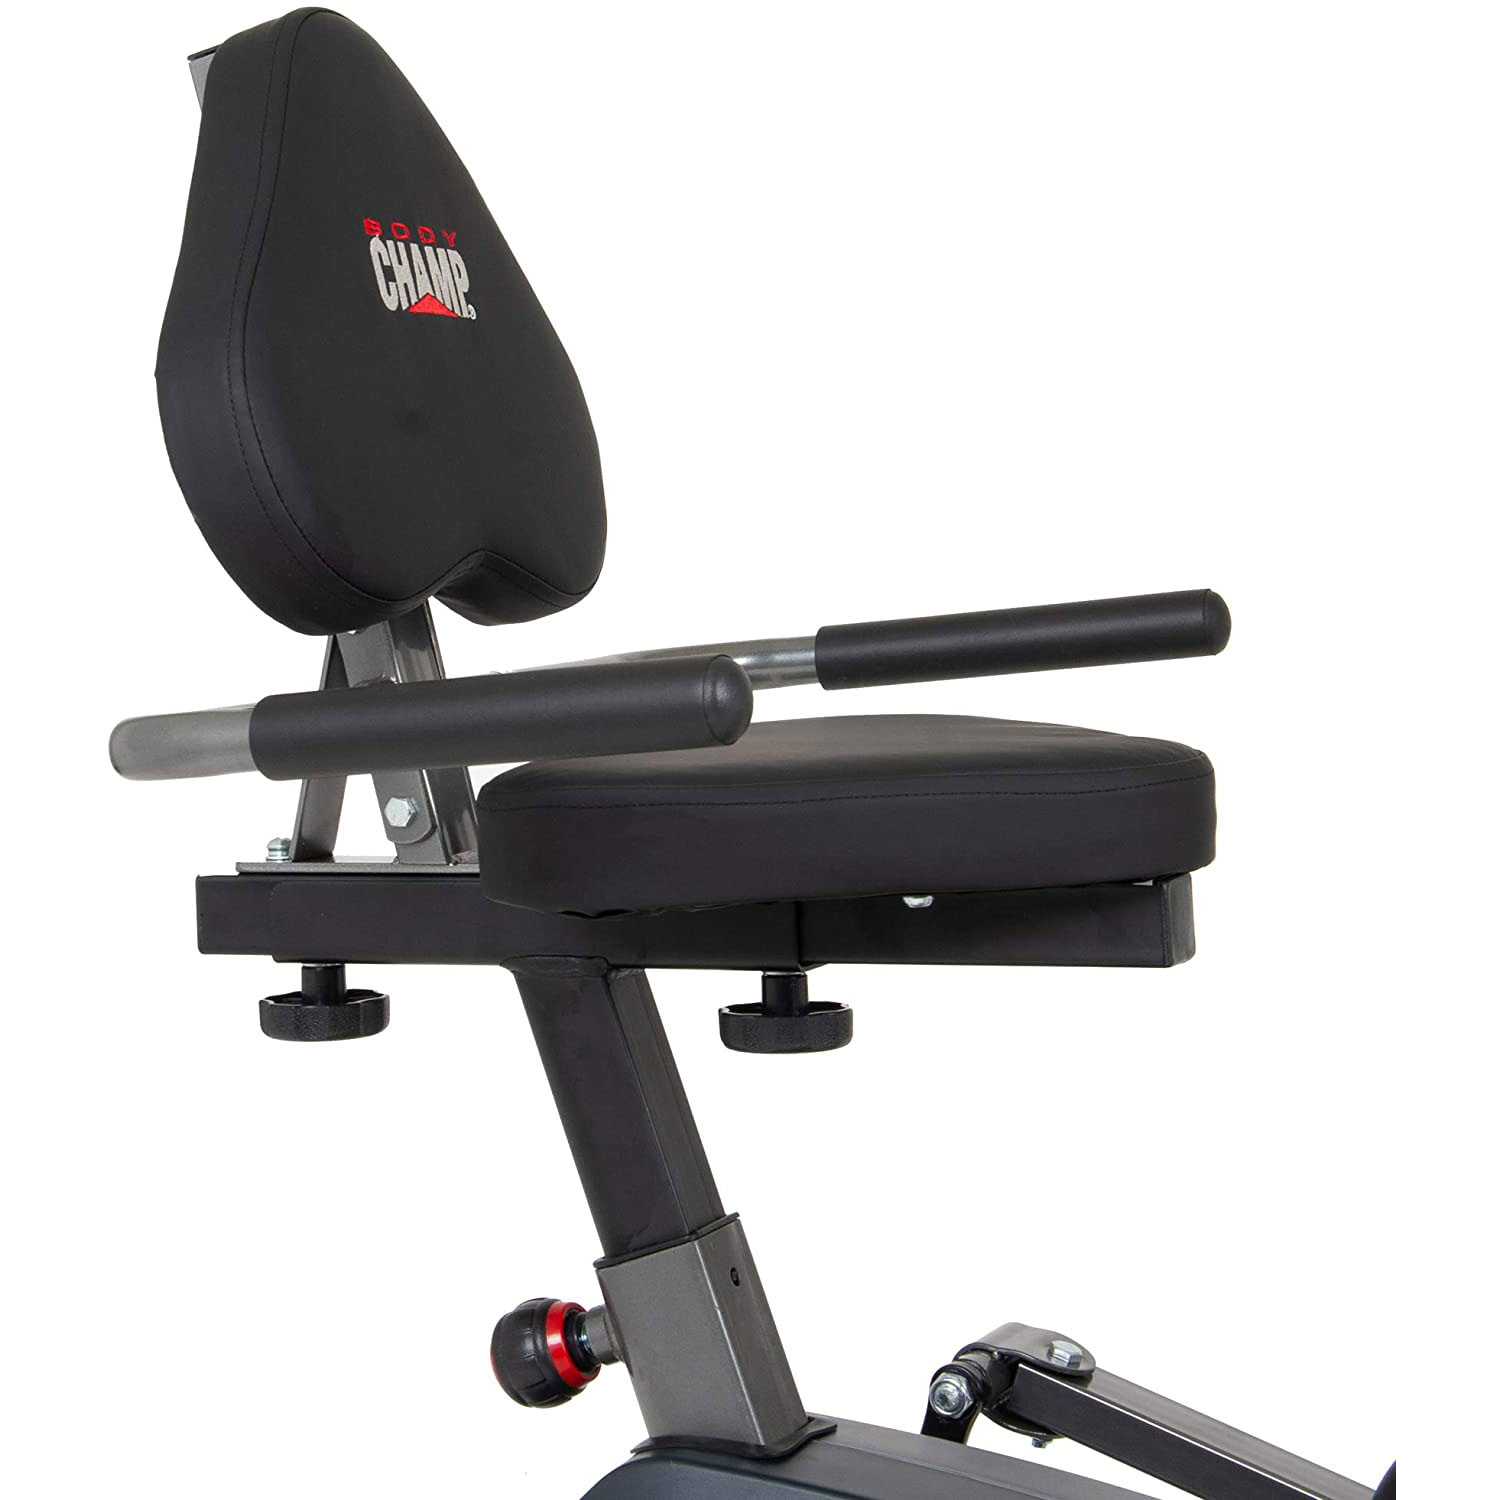 Body Champ BRT1875 3-in-1 Elliptical Trainer, Magnetic Resistance, Heart Rate, Max. 250 lbs - image 5 of 7